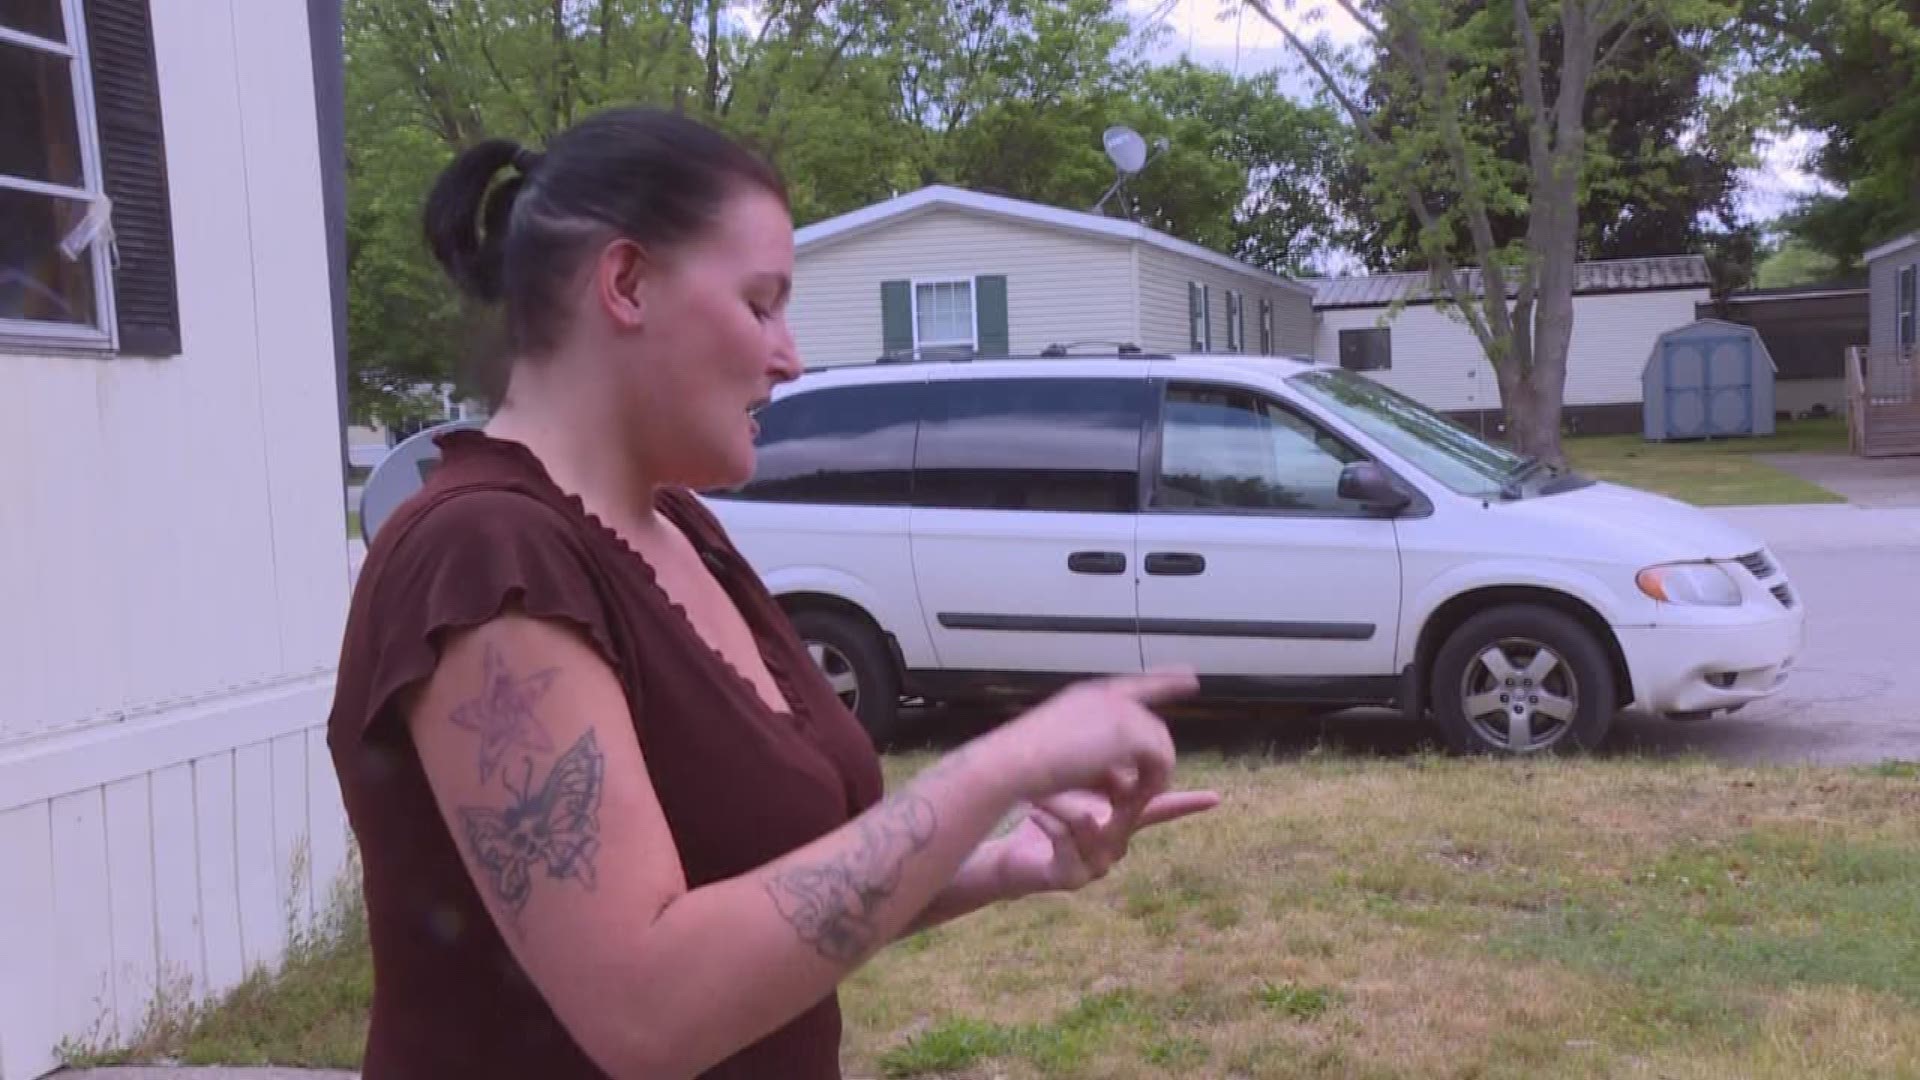 A Muskegon woman now has a new minivan after calling the watchdog team for help.